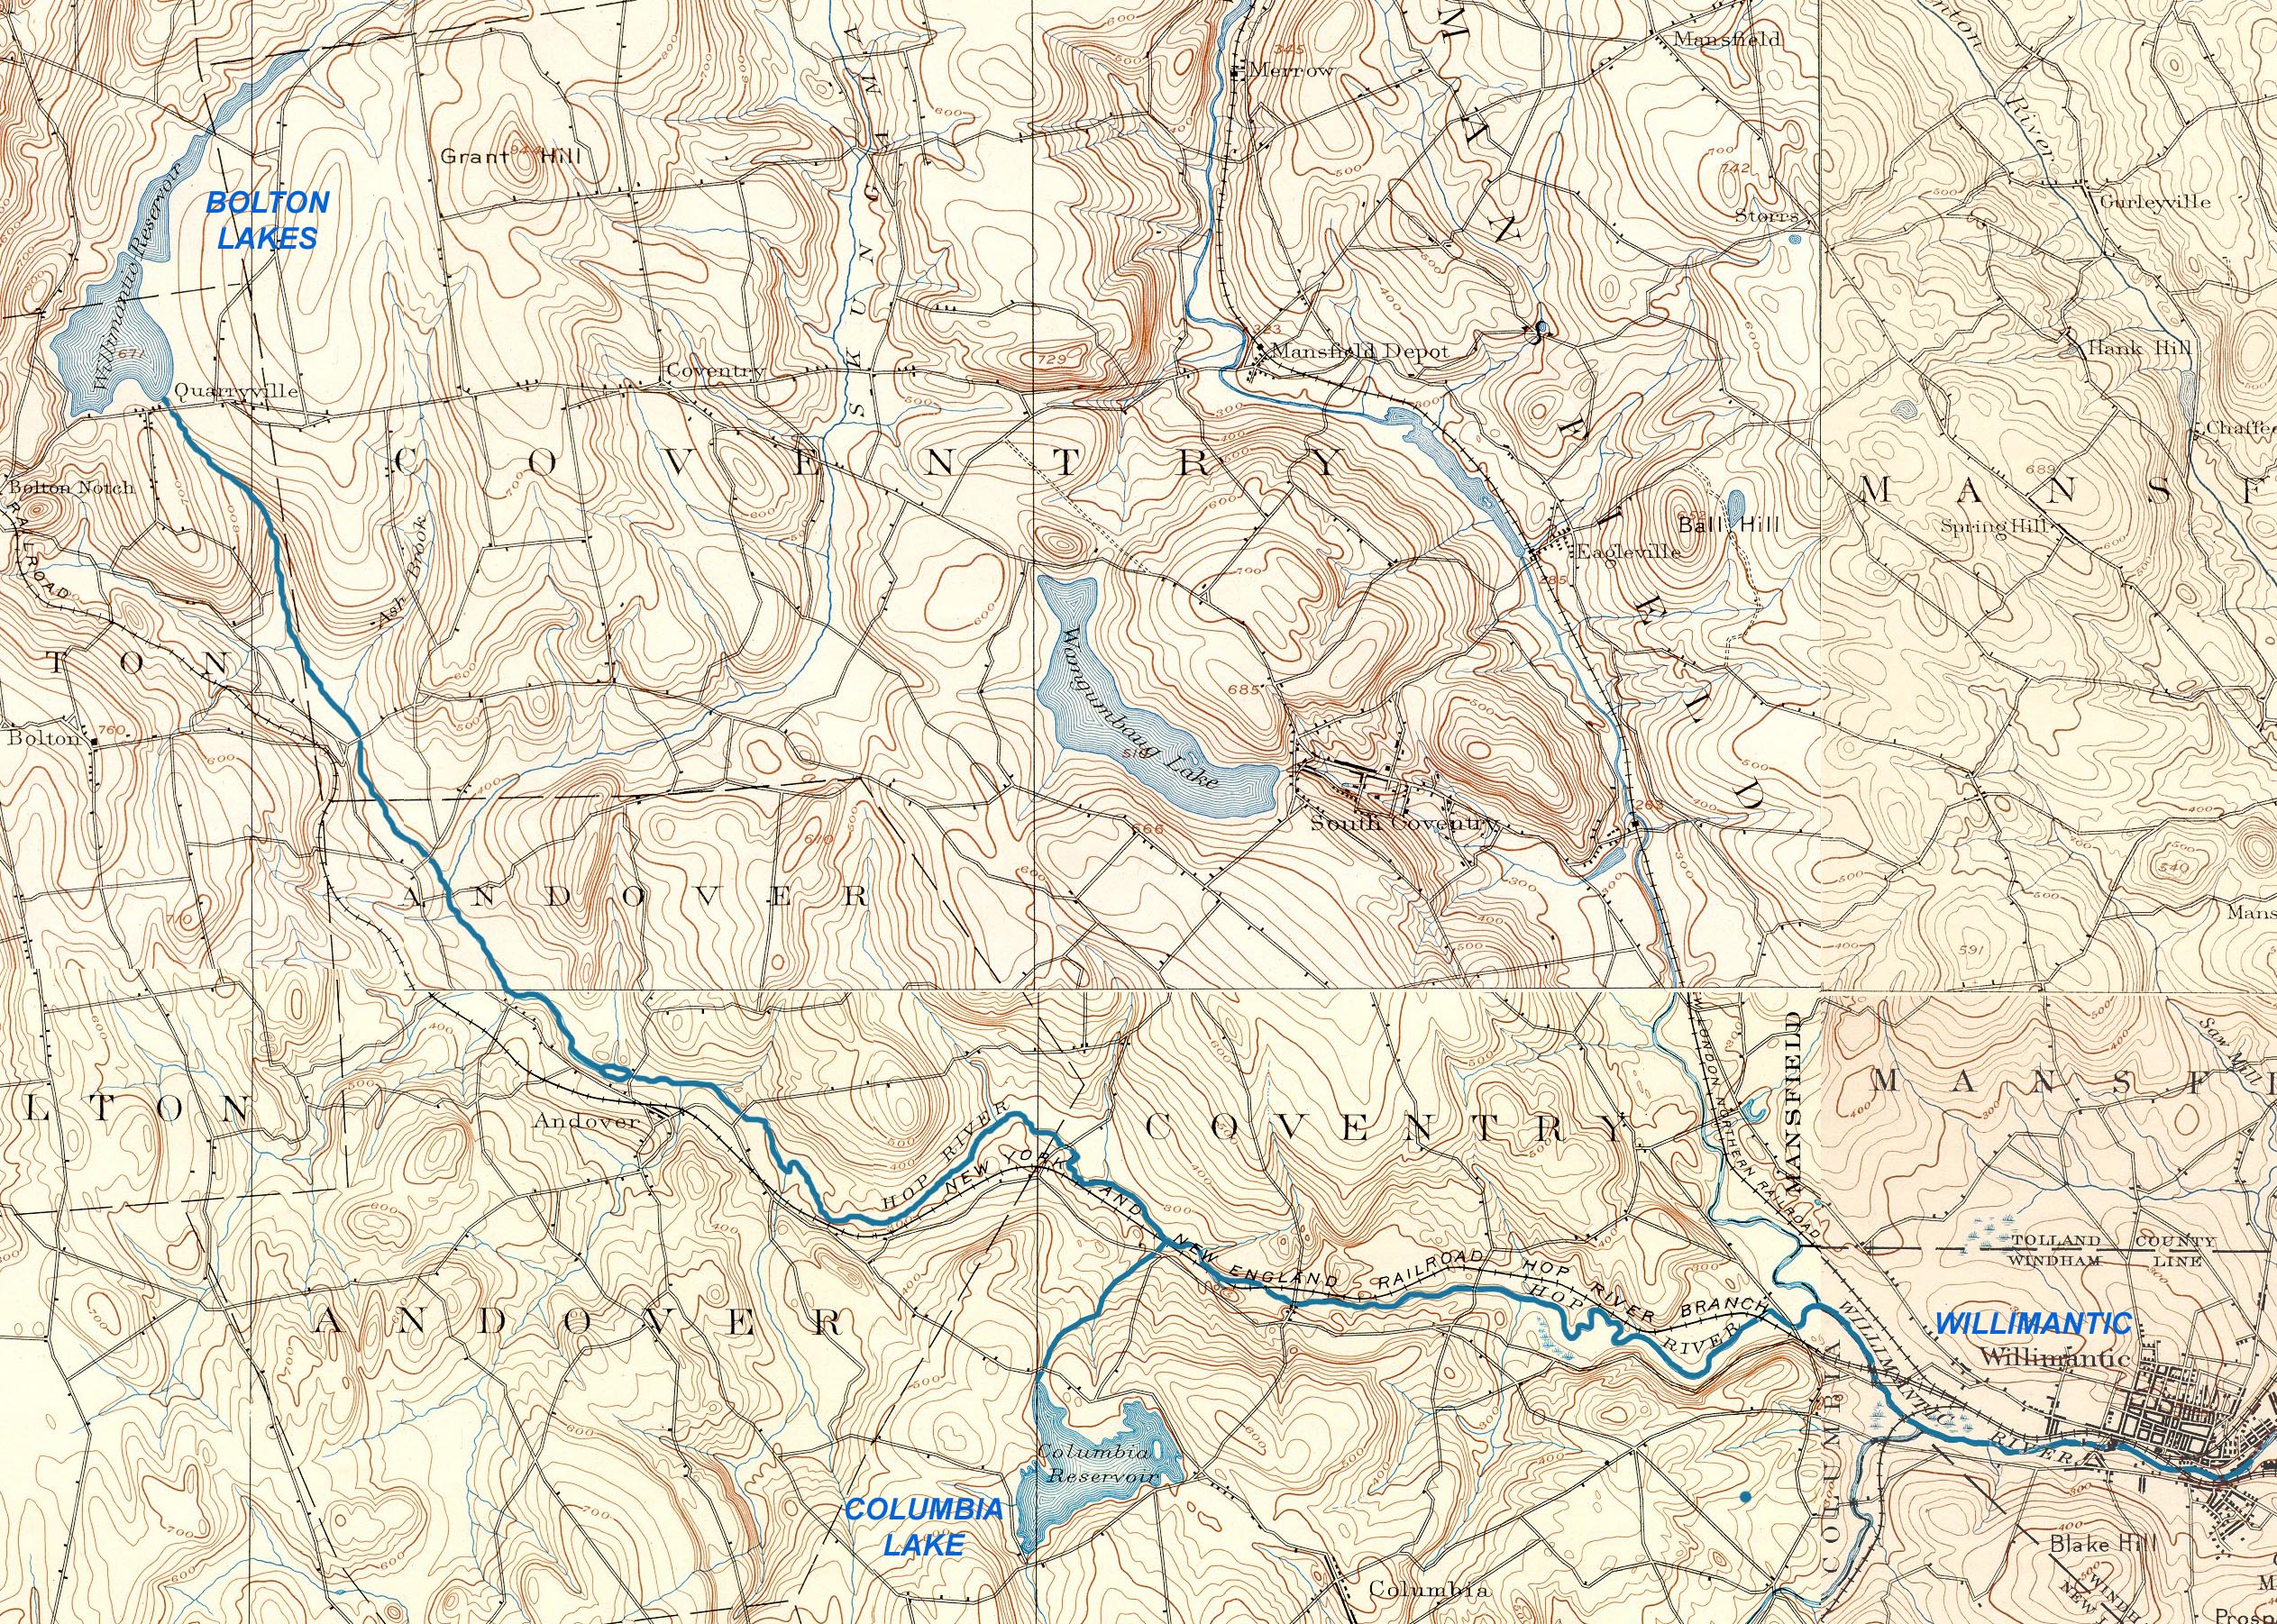 1890 topographical map showing Willimantic and upstream mill ponds